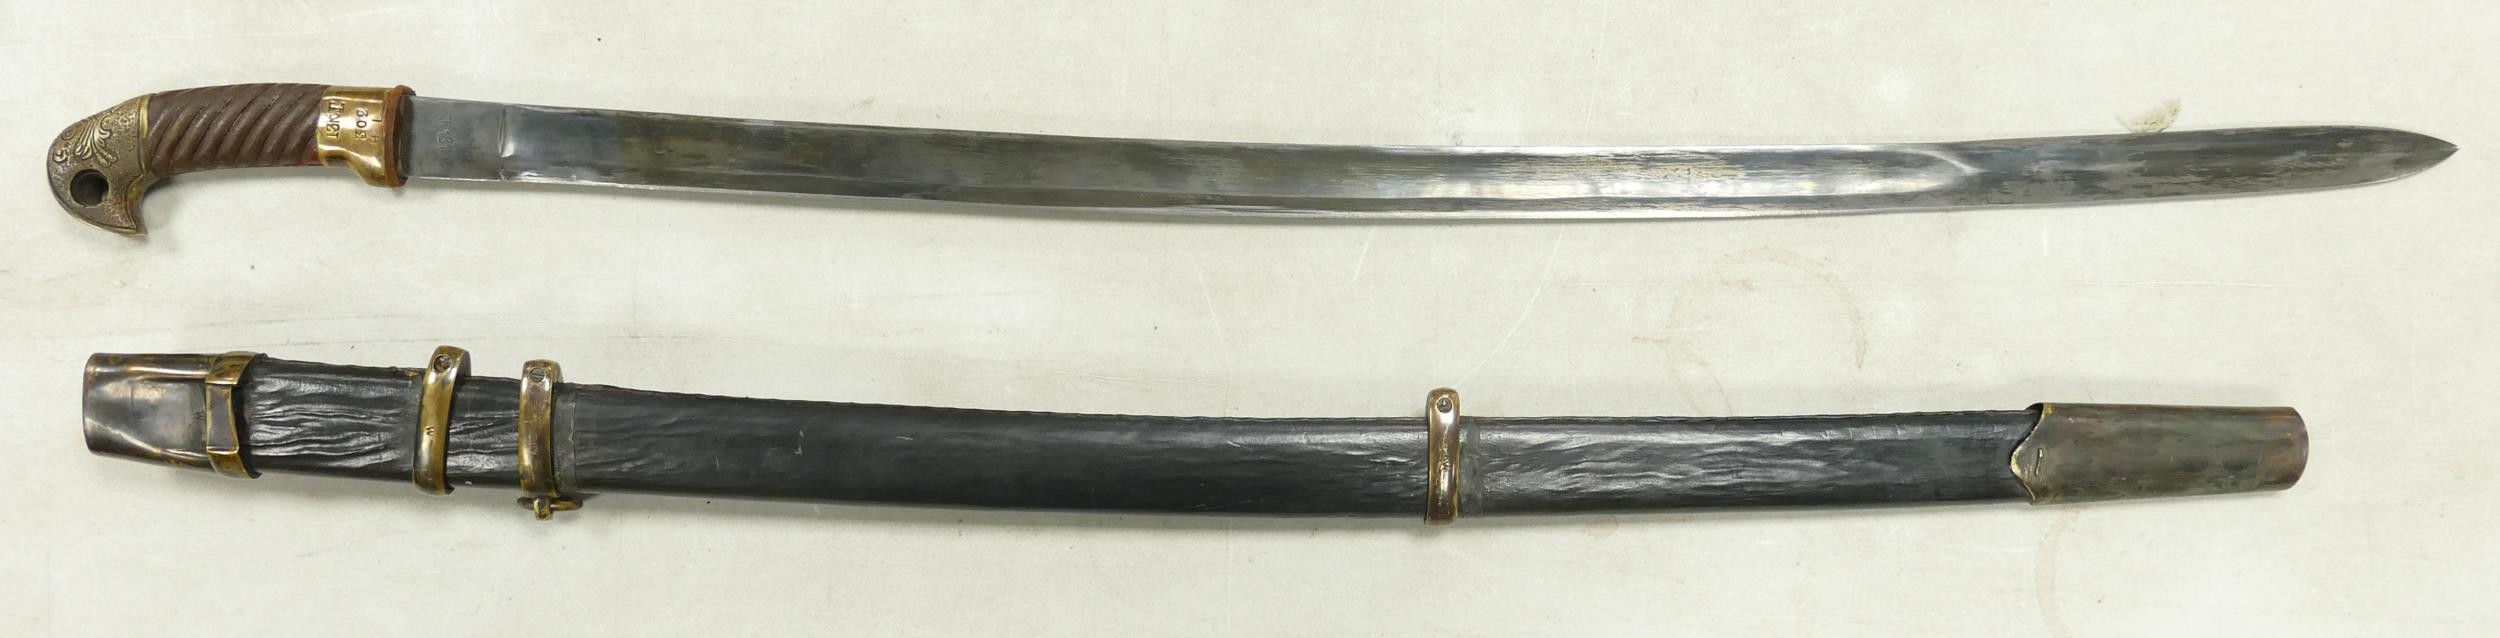 A circa 1934 Russian Shashka Dragoon sabre. Steel blade, brass accents on grip and scabbard. Date - Image 2 of 6